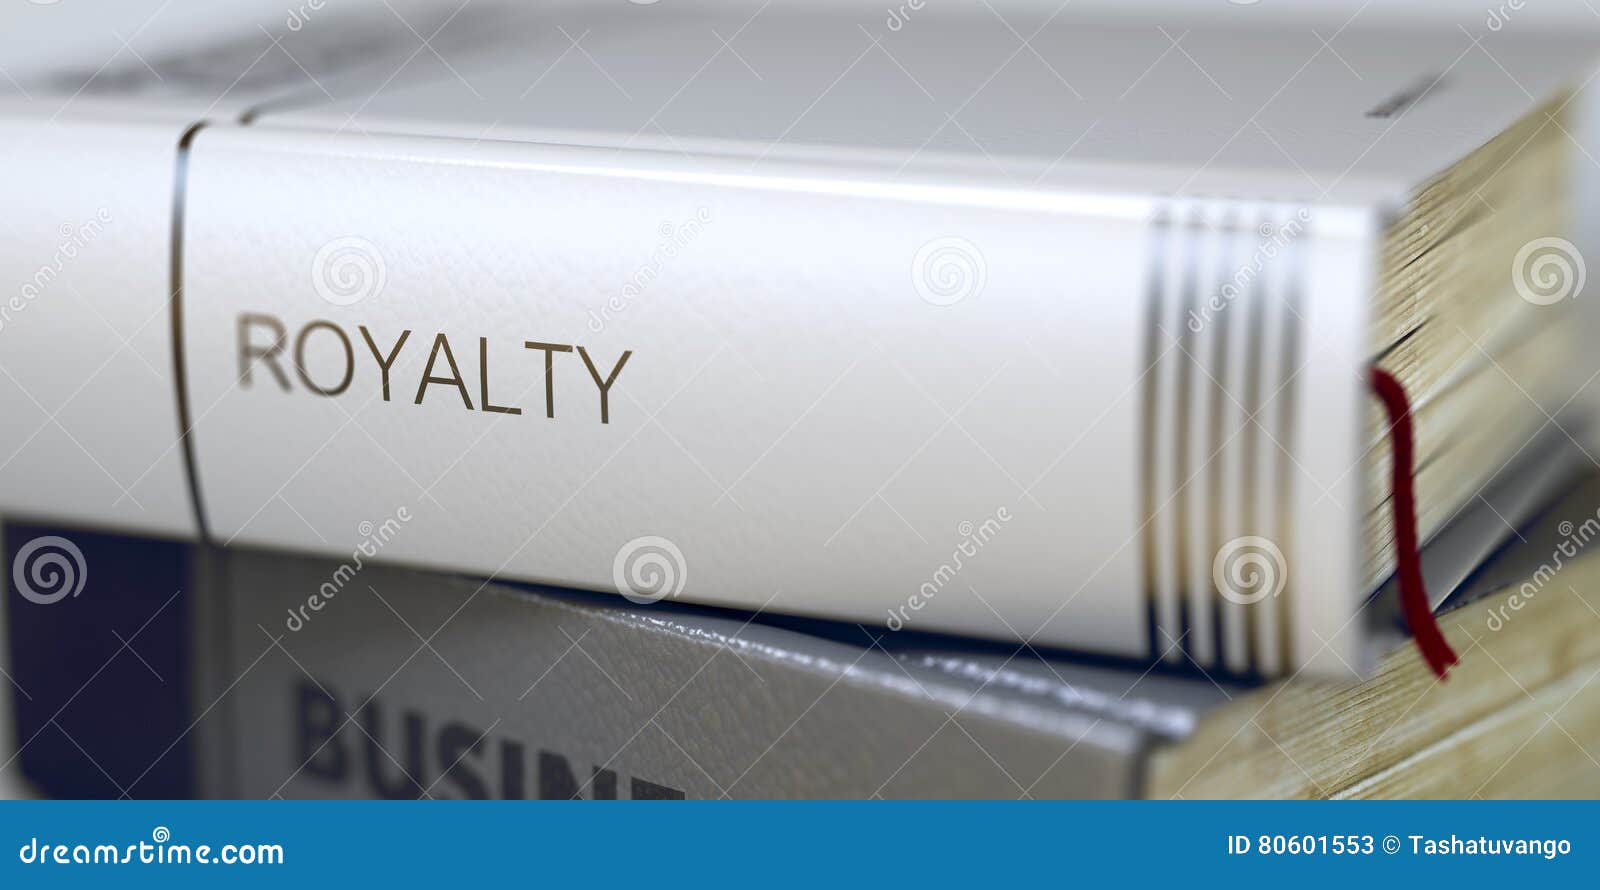 royalty - book title. 3d.